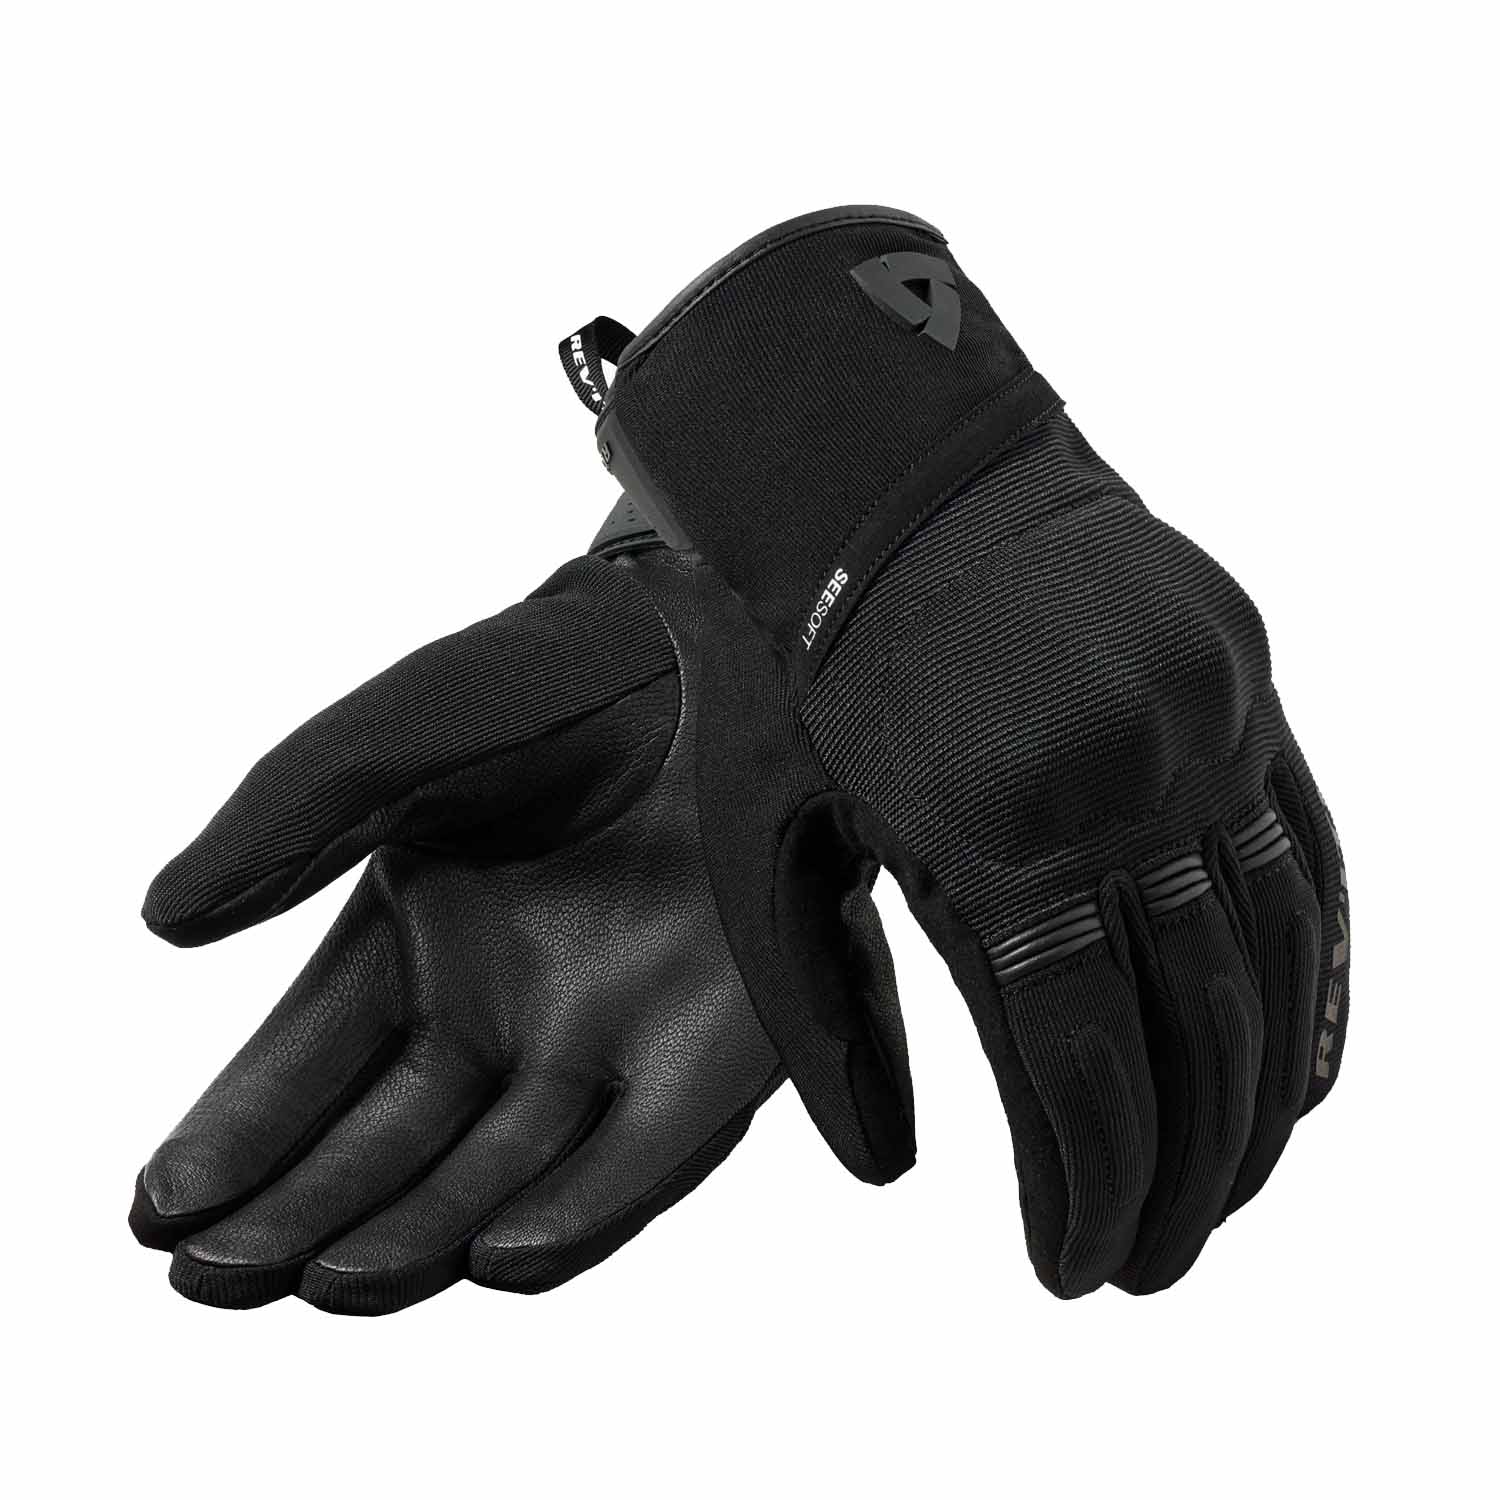 Image of EU REV'IT! Mosca 2 H2O Gloves Black Taille 3XL